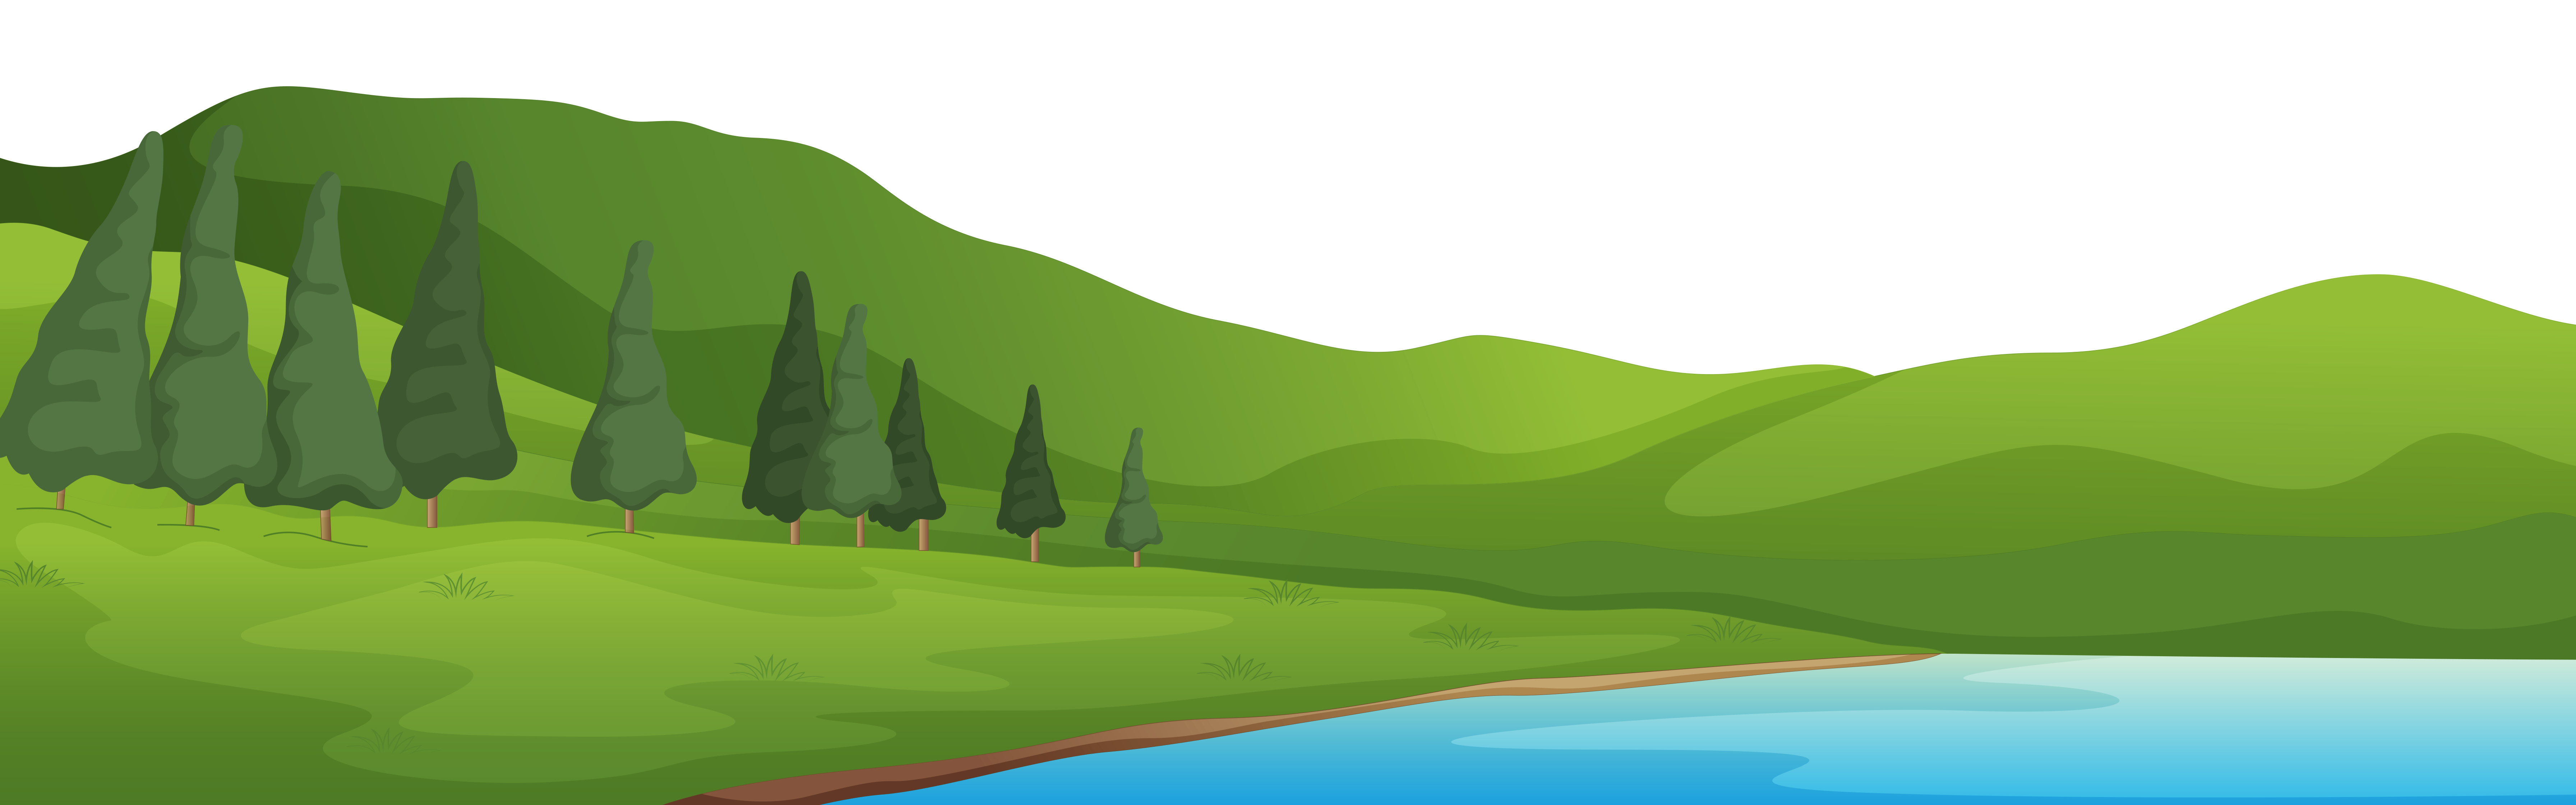 Water clipart mountain. And lake ground png